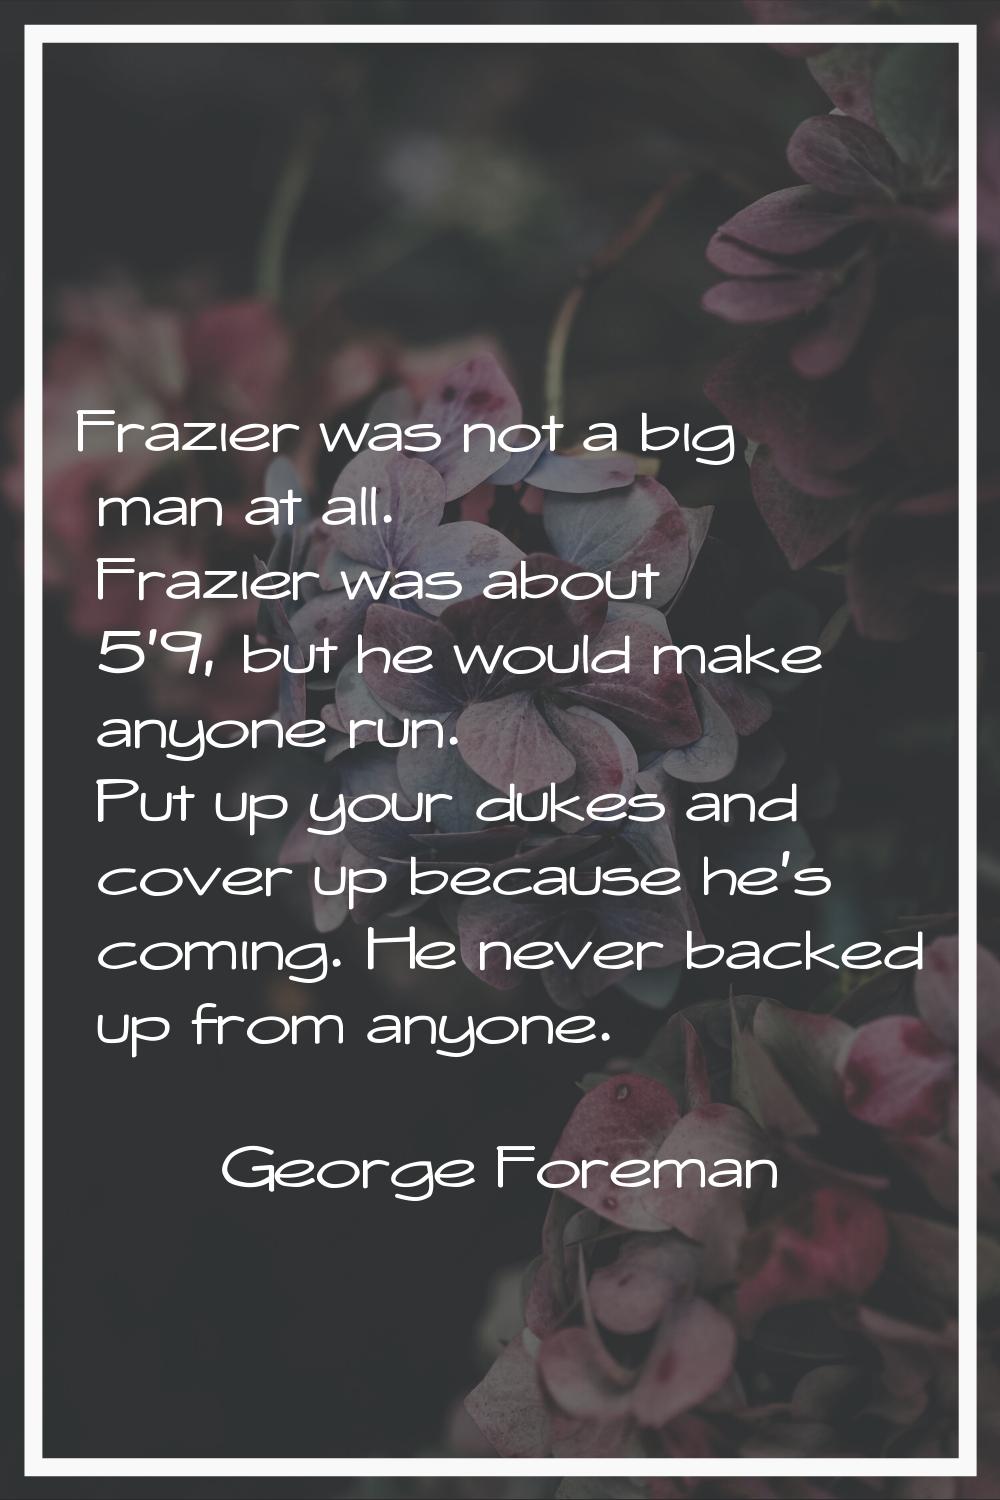 Frazier was not a big man at all. Frazier was about 5'9, but he would make anyone run. Put up your 